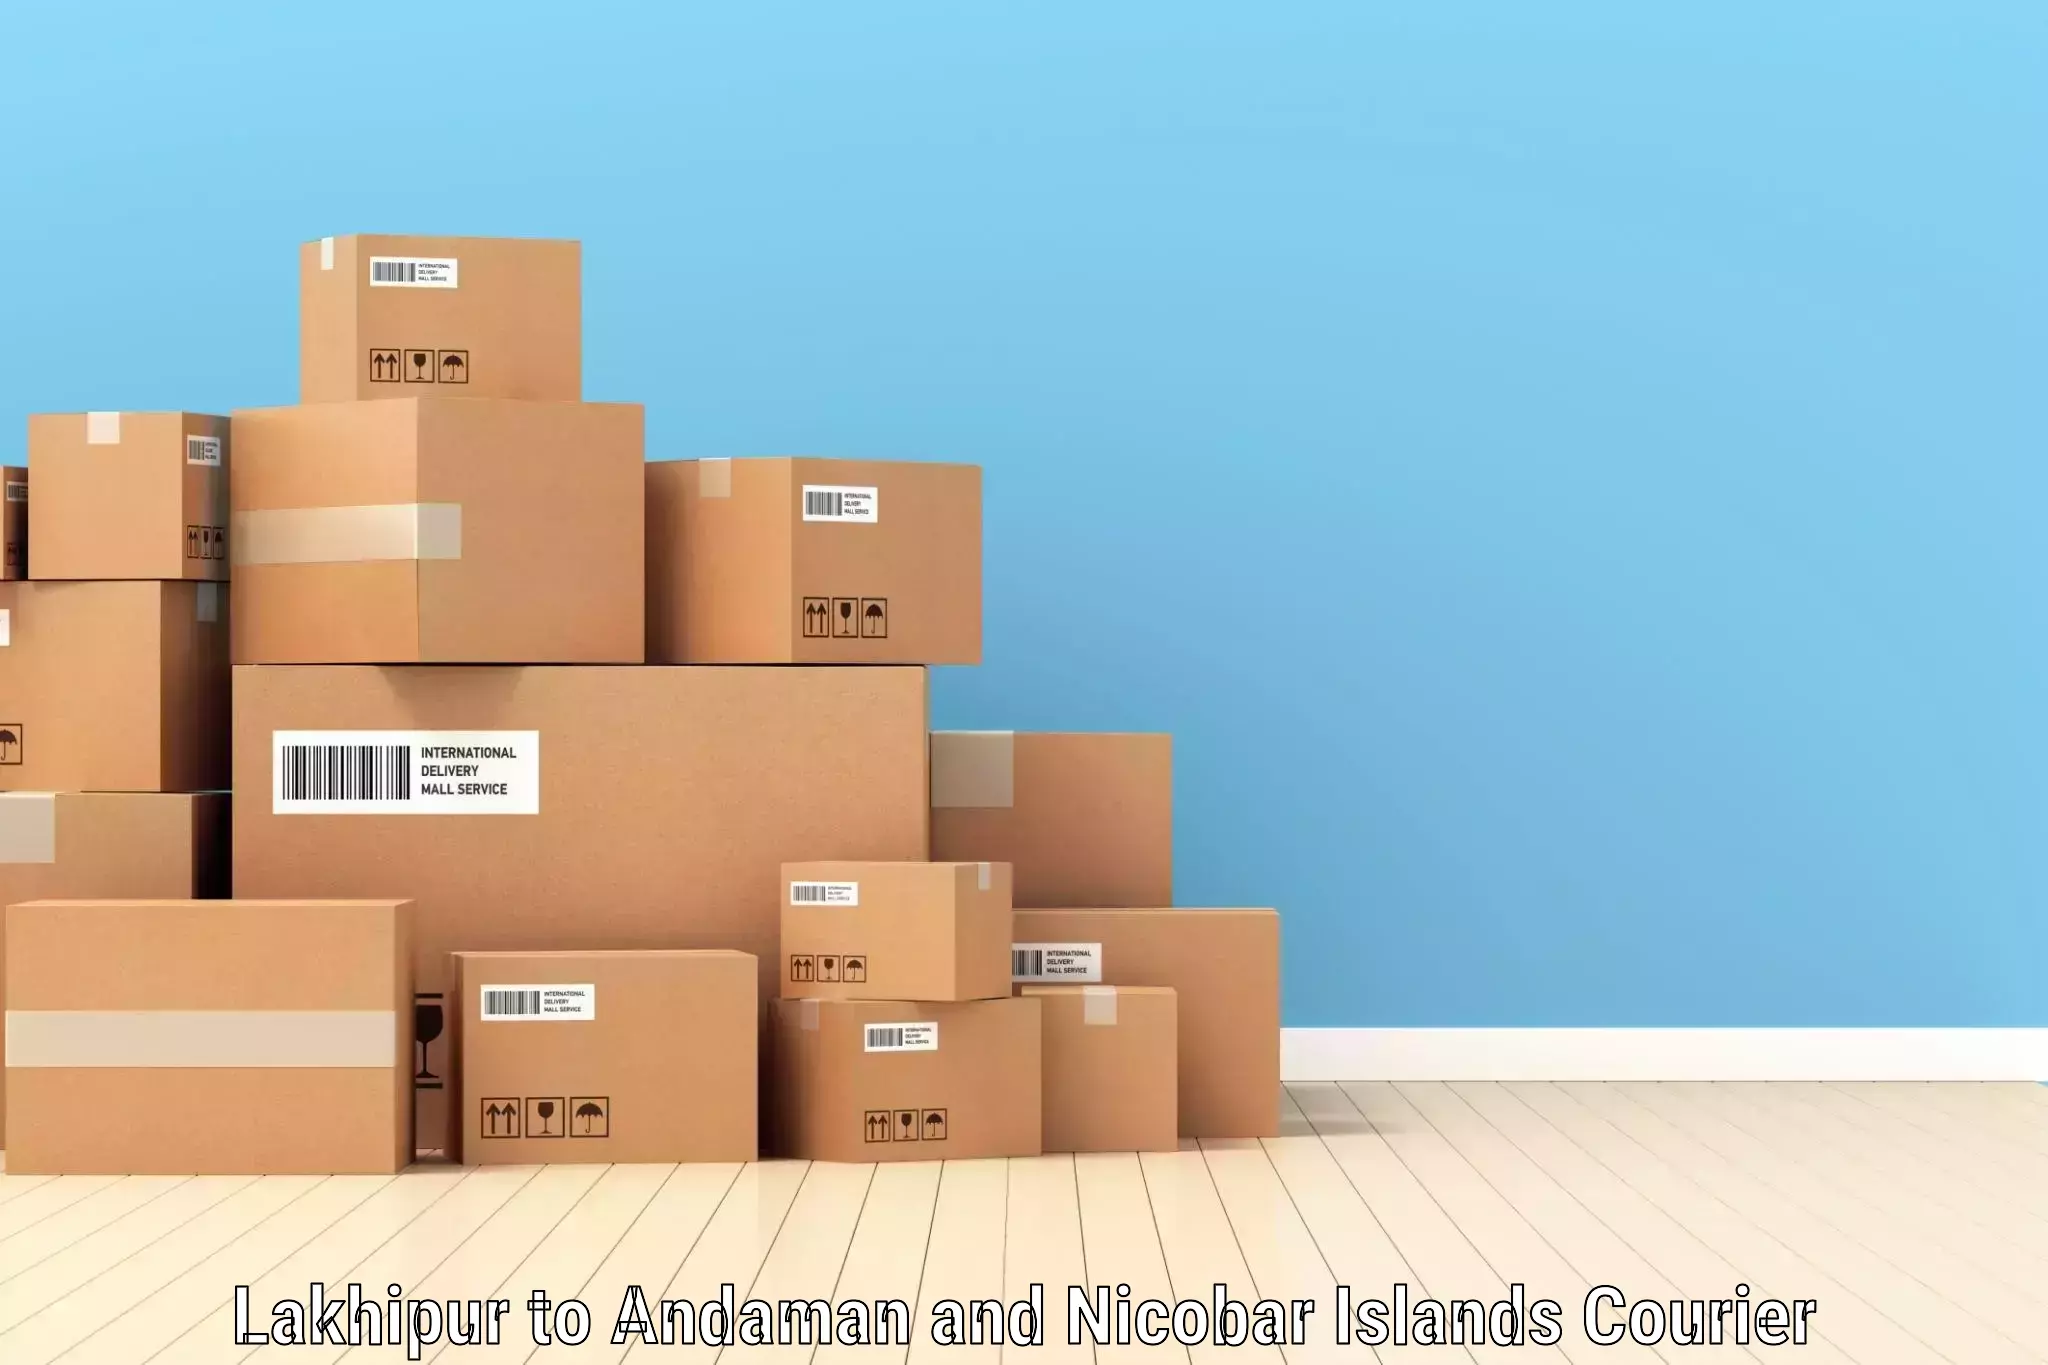 Efficient order fulfillment Lakhipur to South Andaman